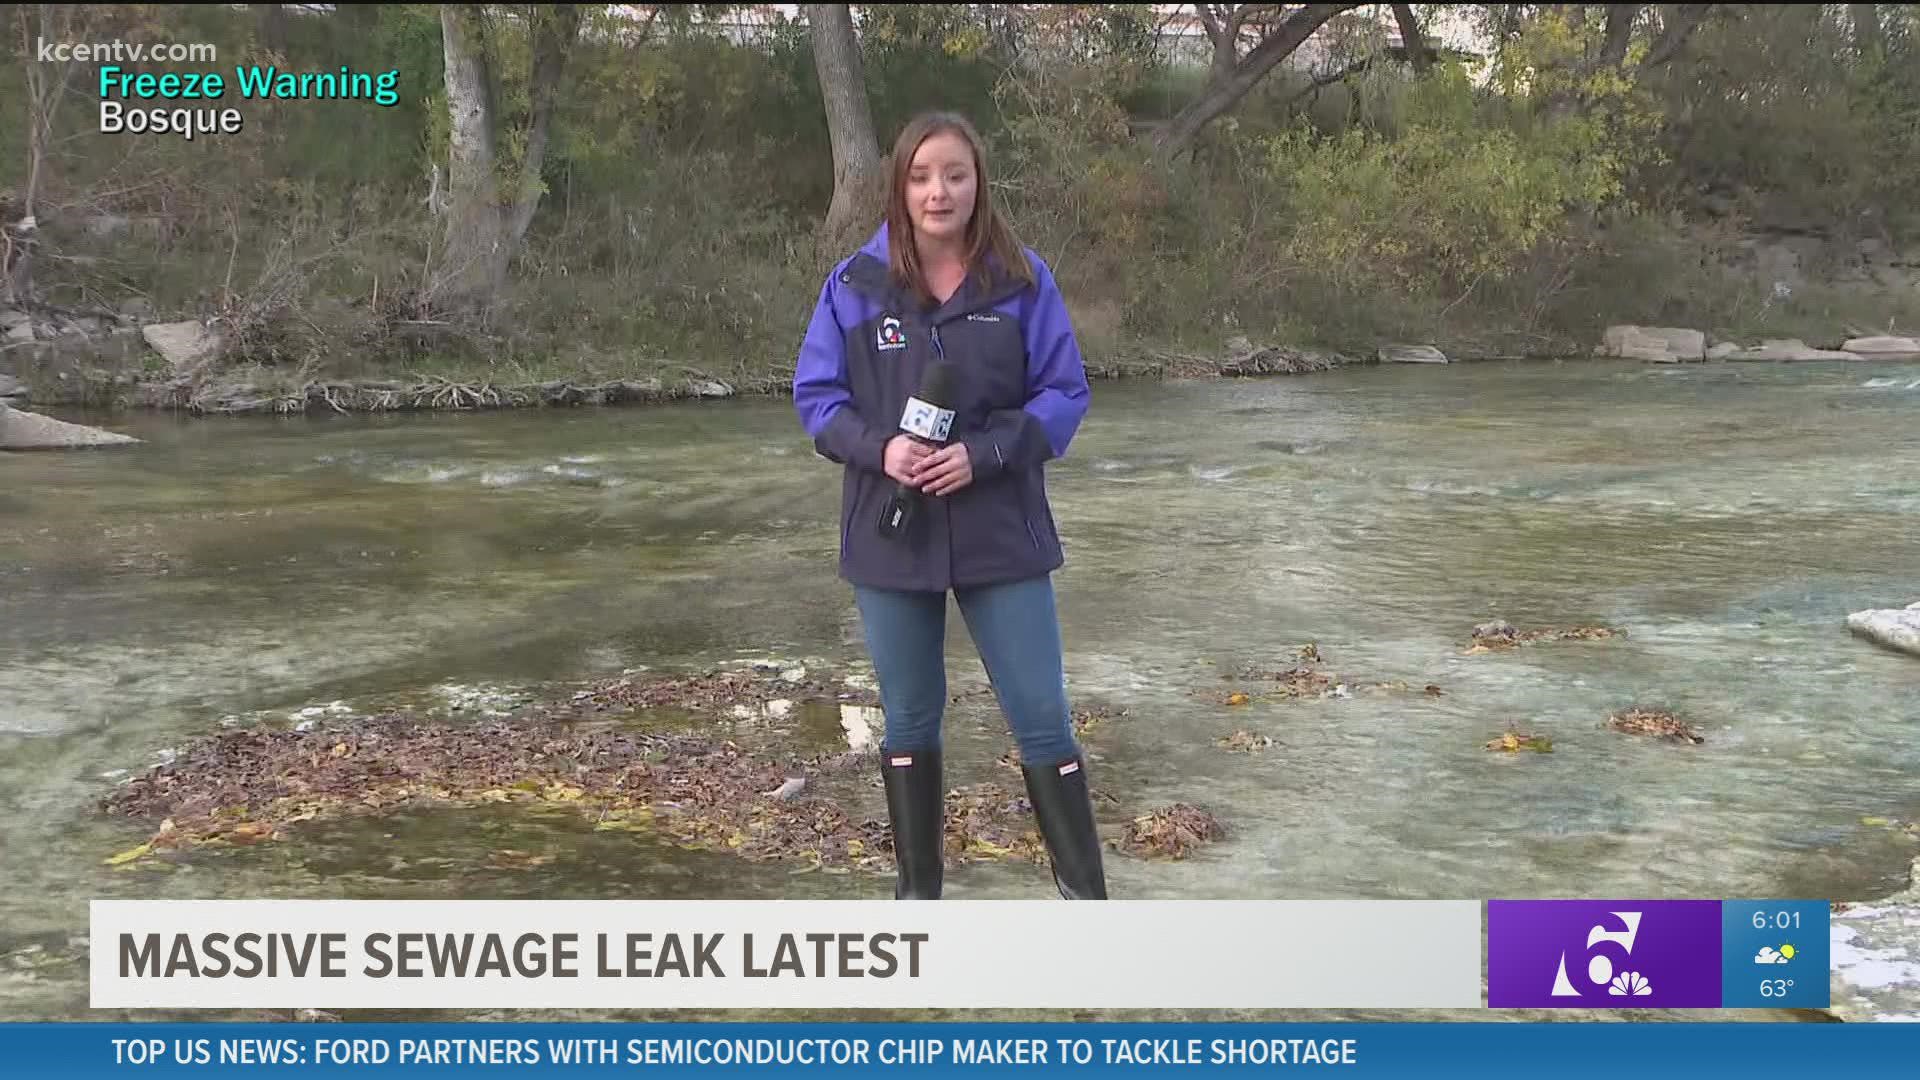 1.3 million gallons of sewage spilled into Nolan Creek, city officials say. Baylee Bates with more.